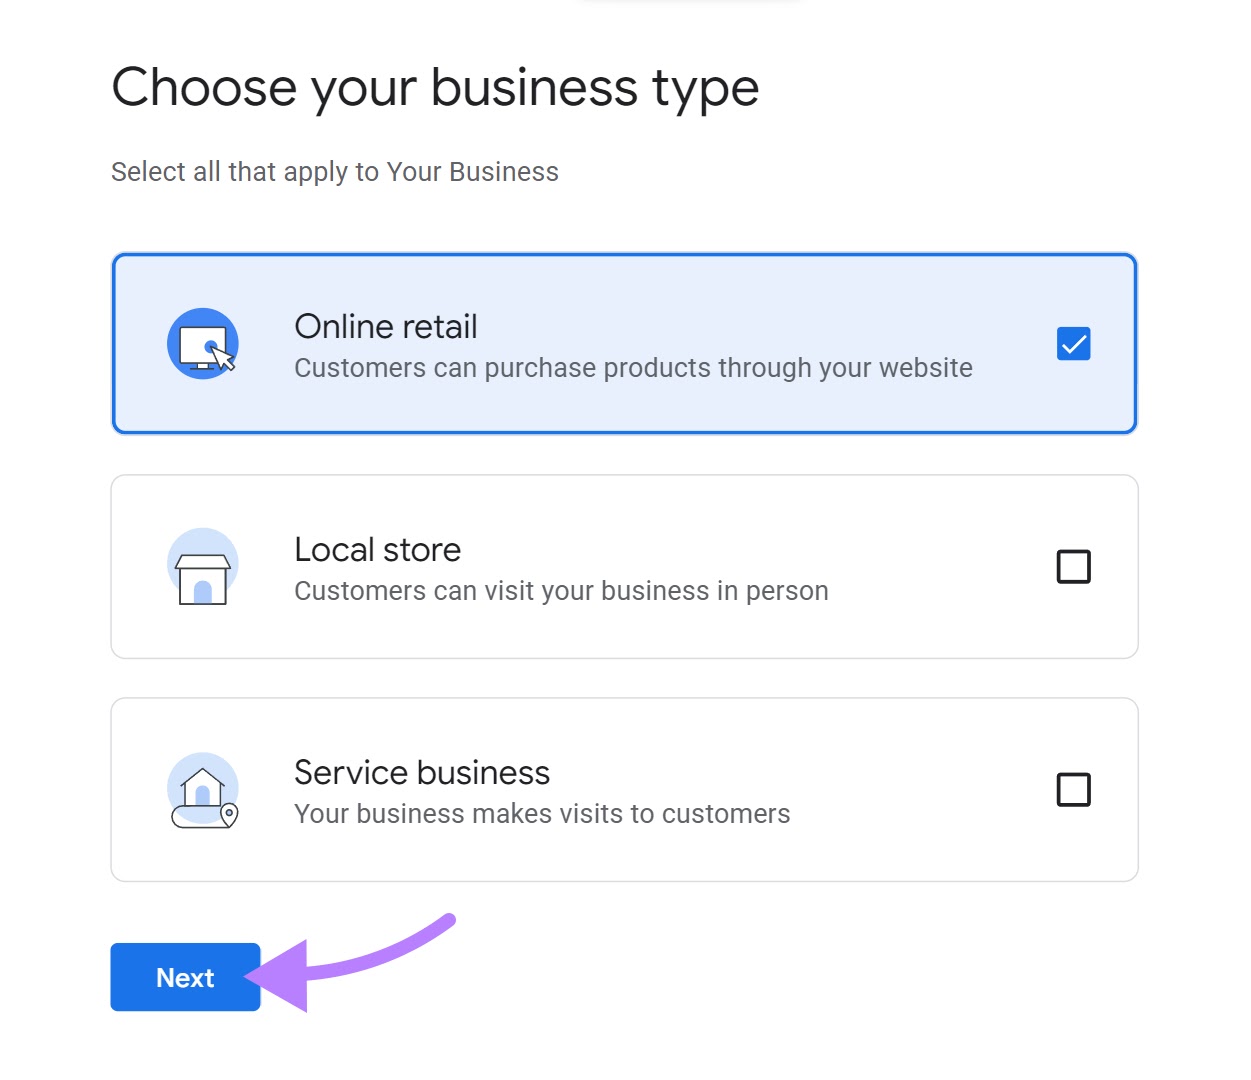 "Online retail" selected under the "Choose your business type" window